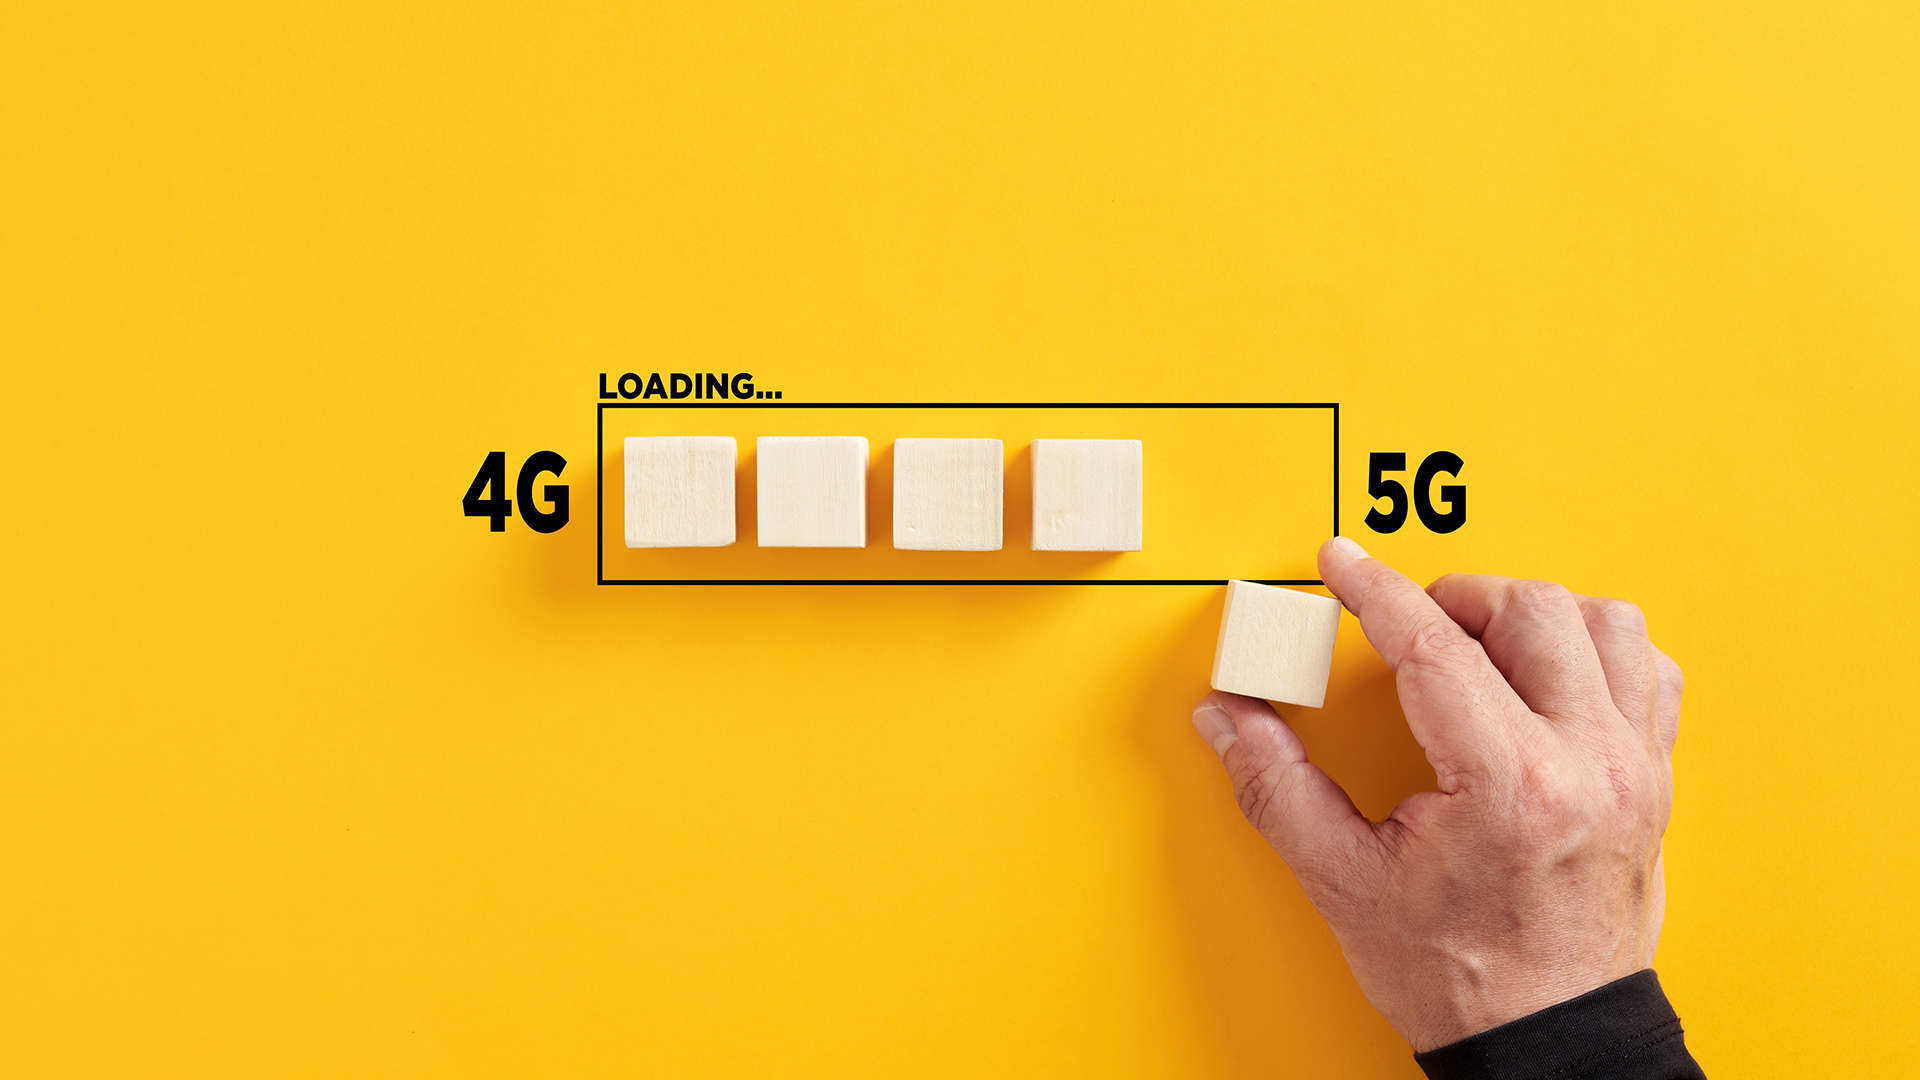 Loading bar with wooden blocks going from 4G to 5G